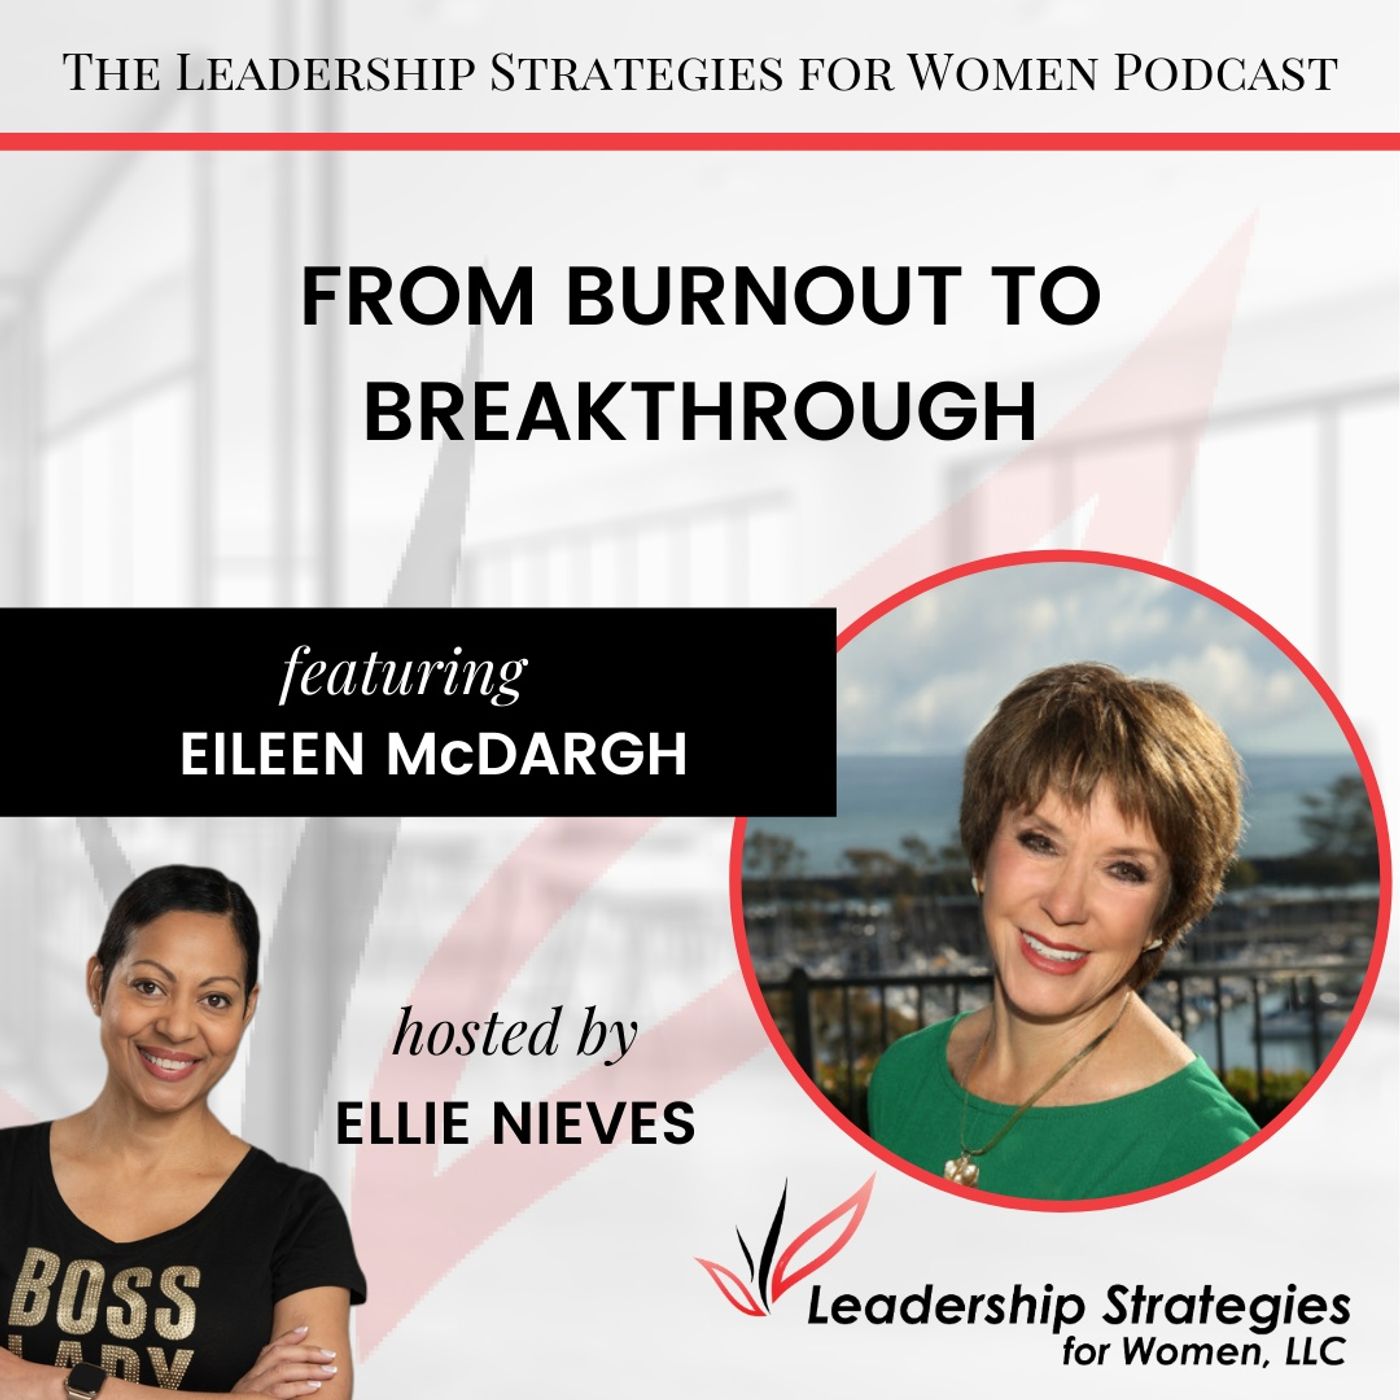 From Burnout to Breakthrough